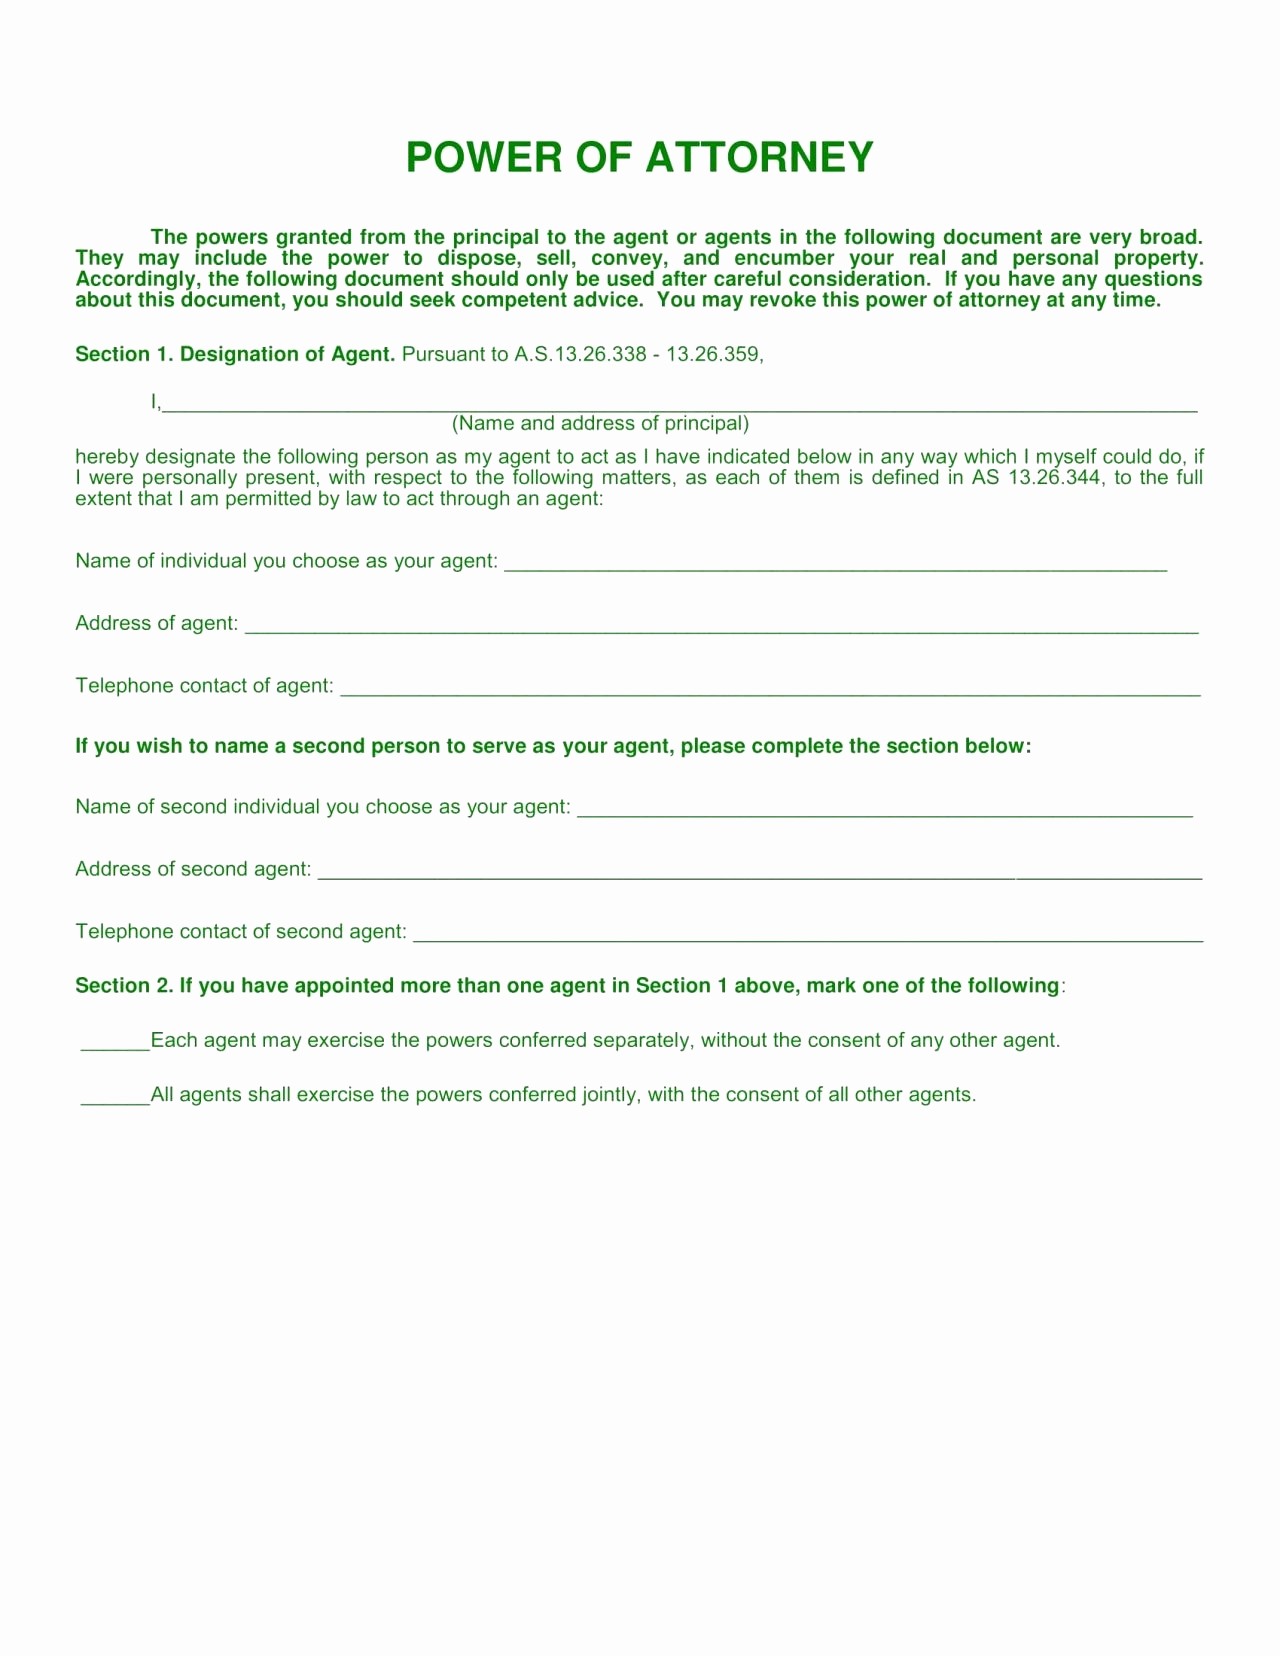 50 Lovely Power Of Attorney Form Free Printable DOCUMENTS IDEAS